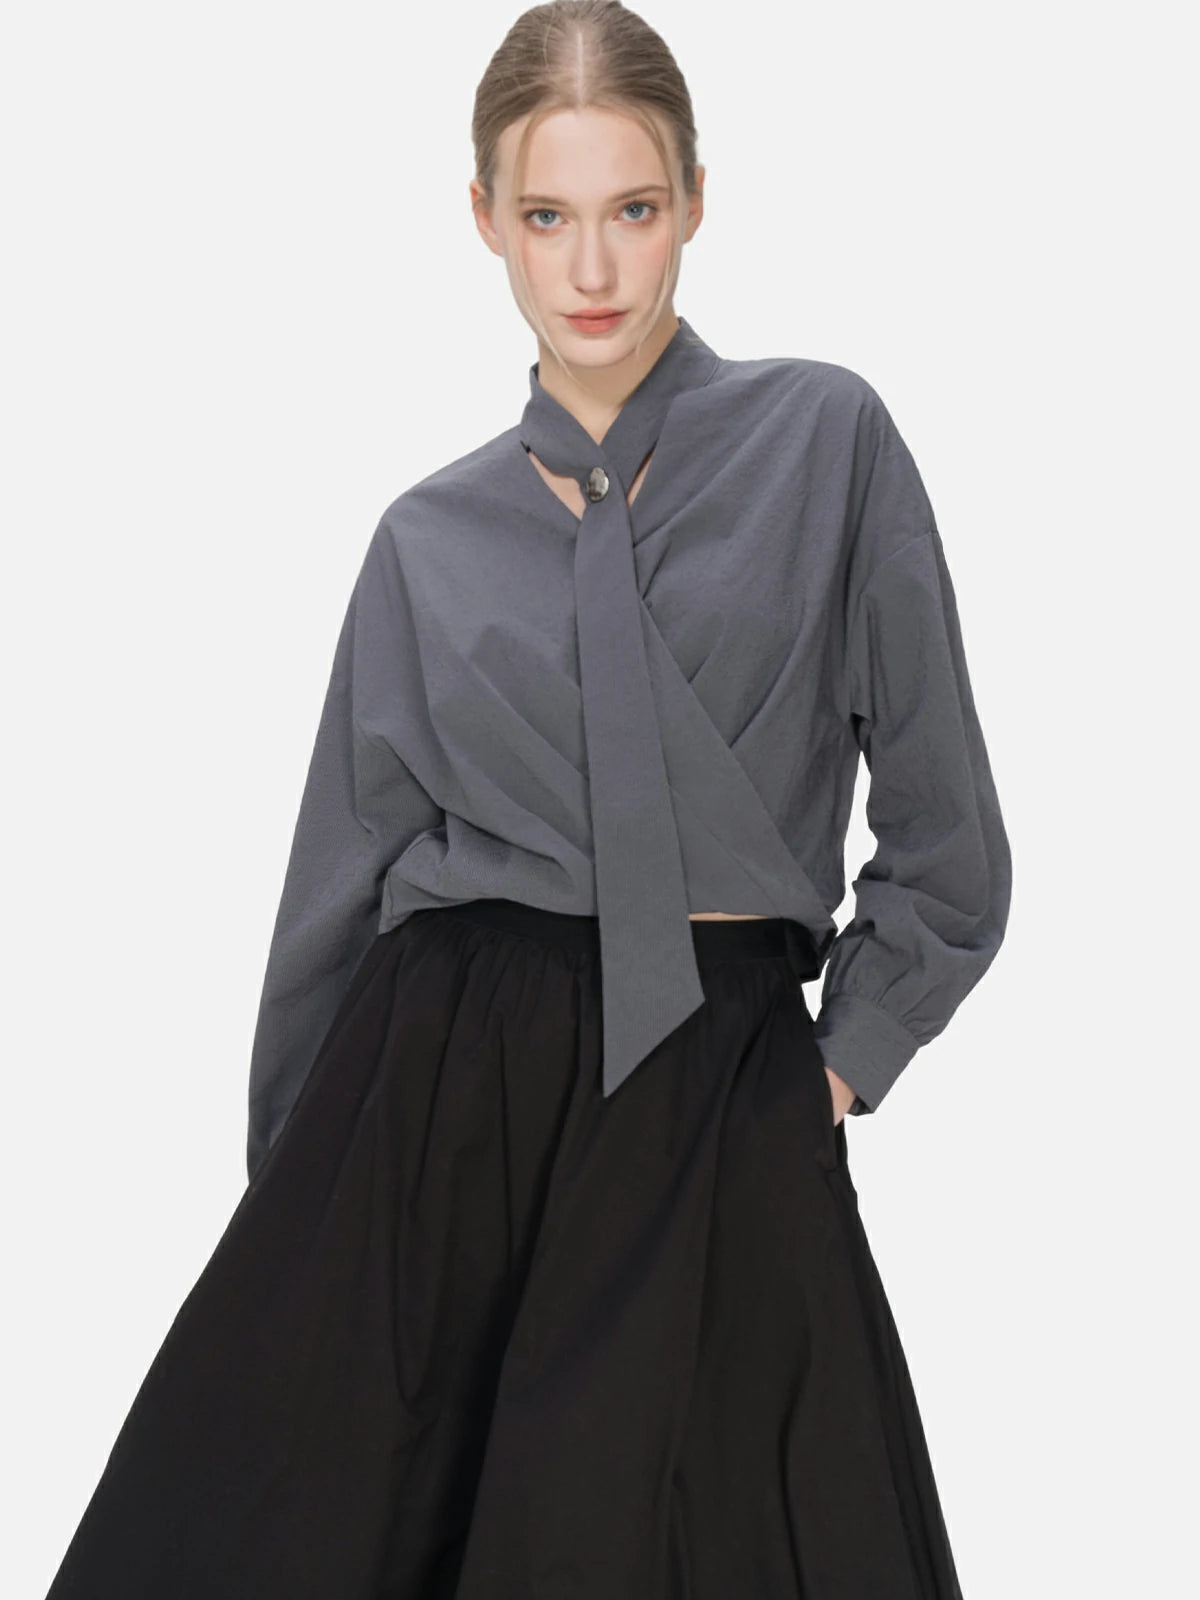 V-neck blouse with cascading ribbons and a cross-folded hem, embodying a modern and elegant fashion statement with unique charm.